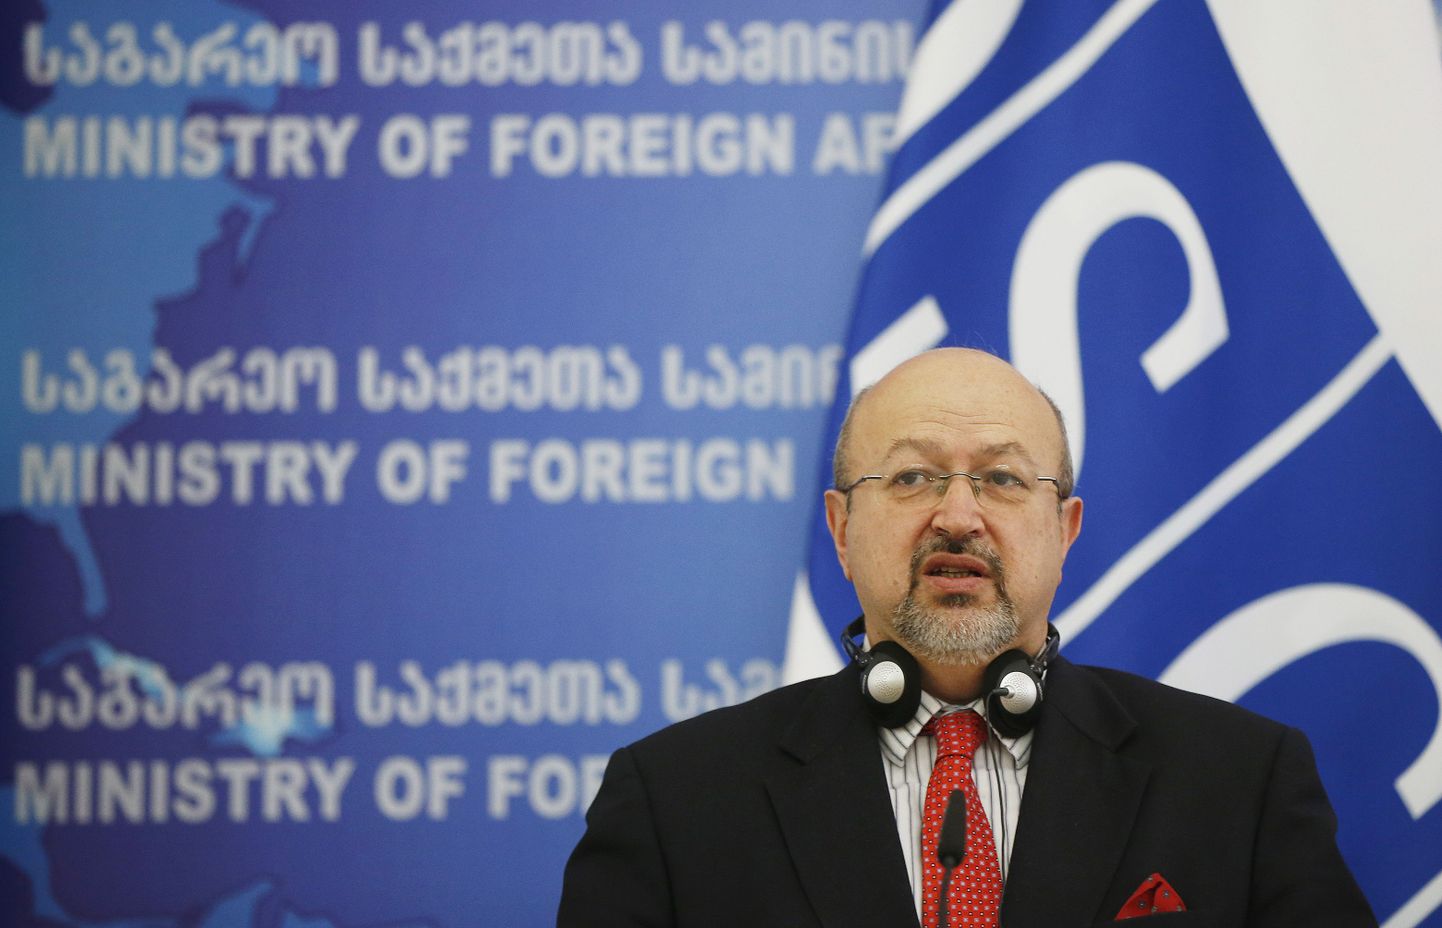 Organisation for Security and Cooperation in Europe (OSCE) Secretary General Lamberto Zannier speaks during a news conference in Tbilisi, March 9, 2015. REUTERS/David Mdzinarishvili (GEORGIA - Tags: POLITICS)